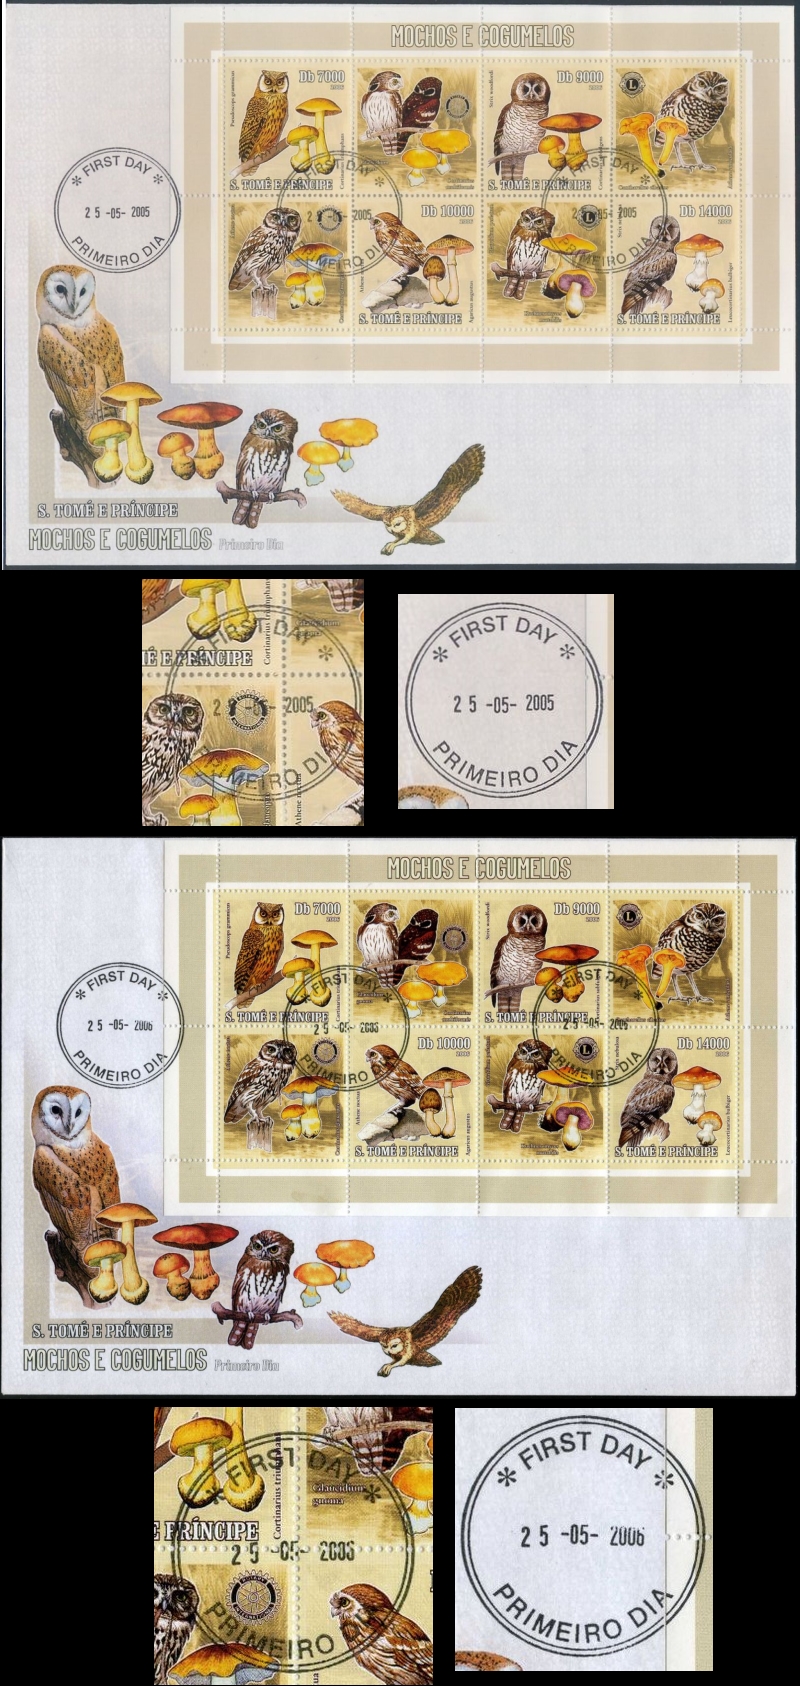 Saint Thomas and Prince Islands 2006 Owls and Mushrooms Stamperija Issue on 2005 and 2006 First Day Covers